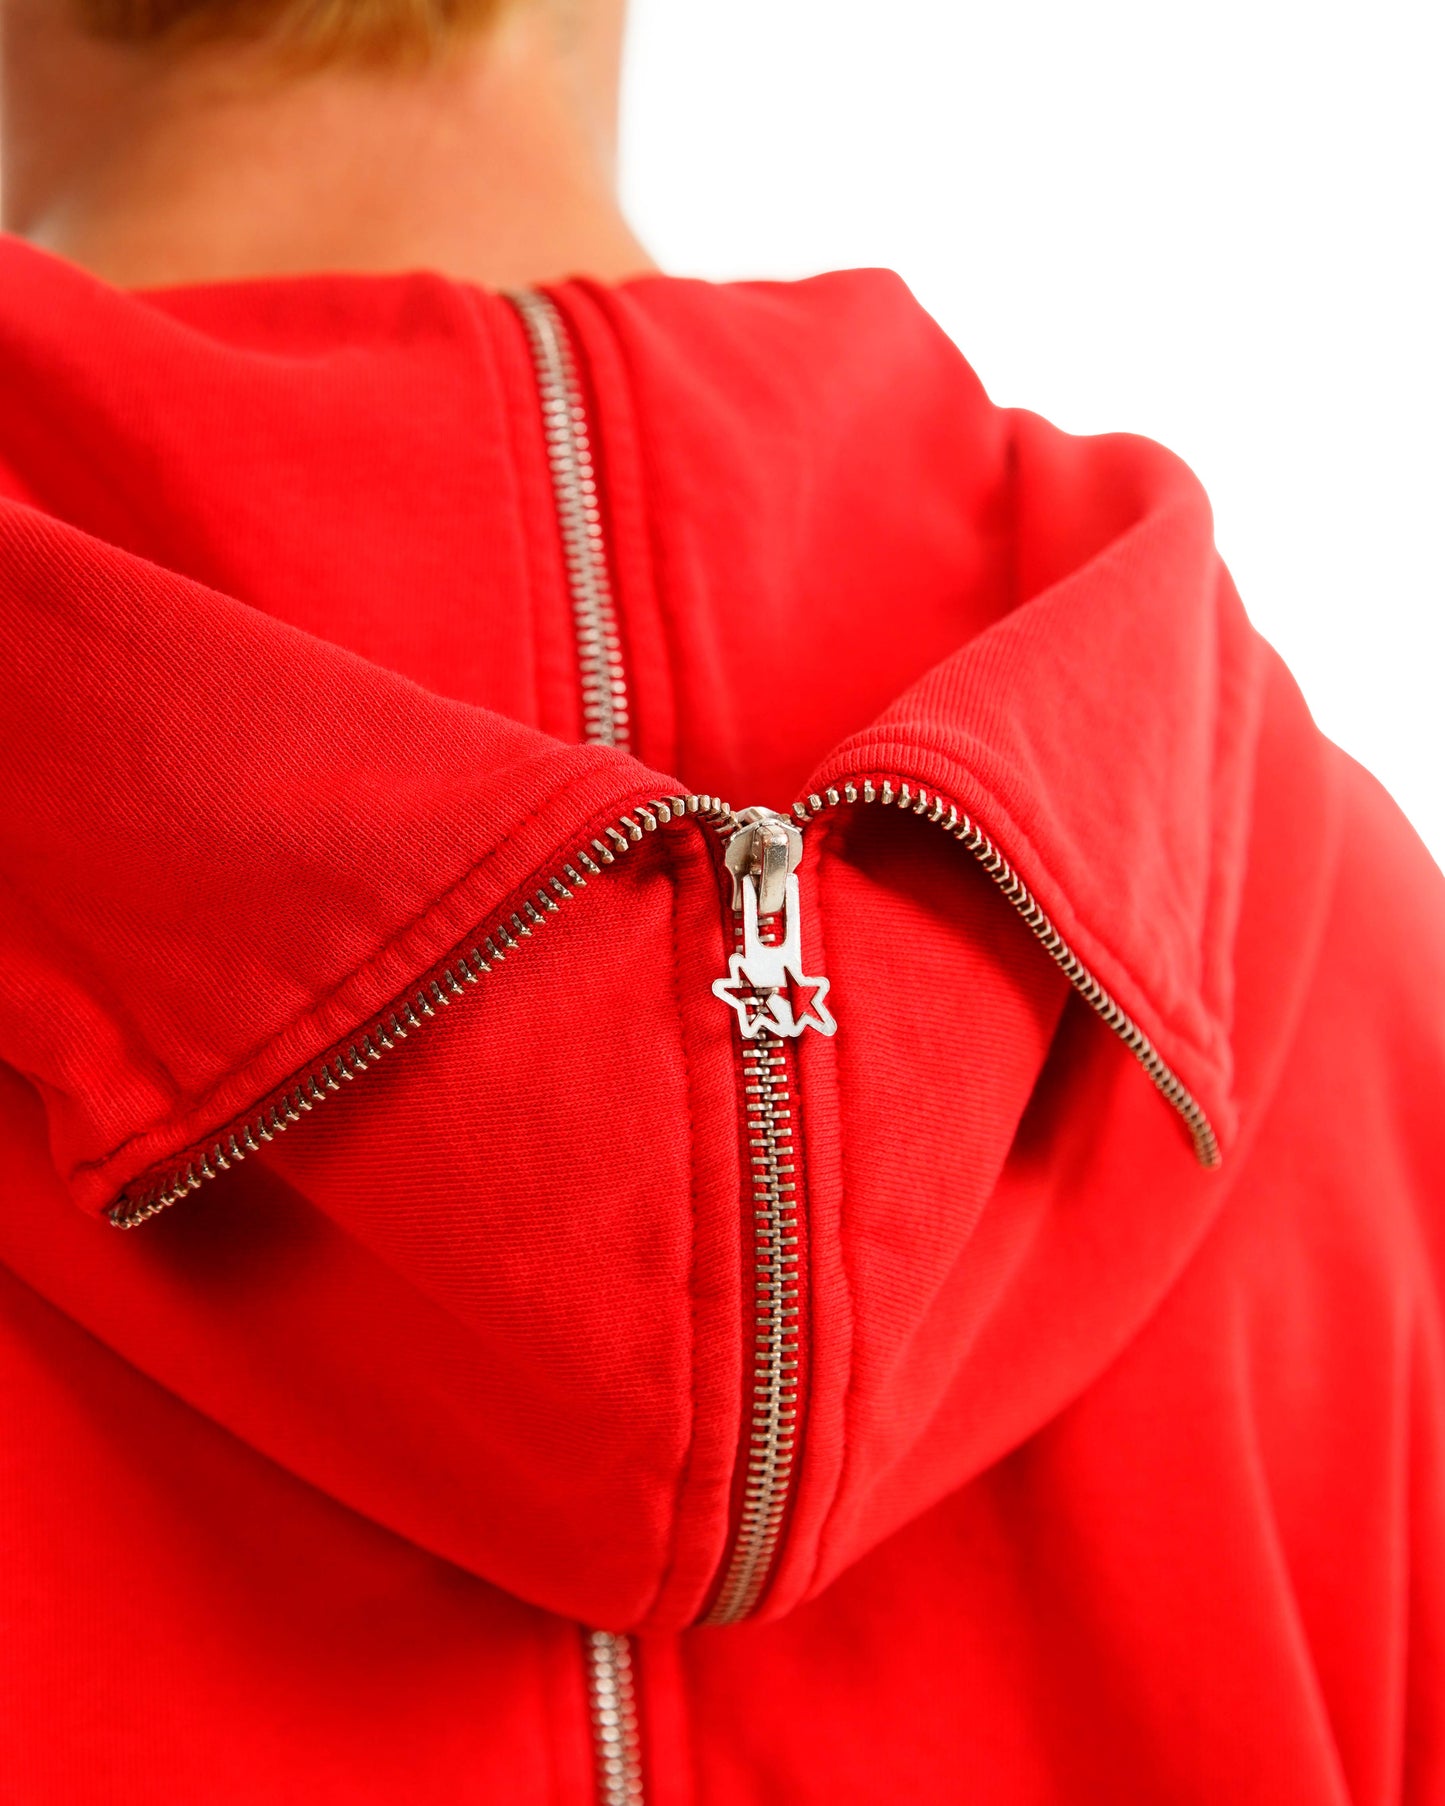 Division x TwoJeys zipper red